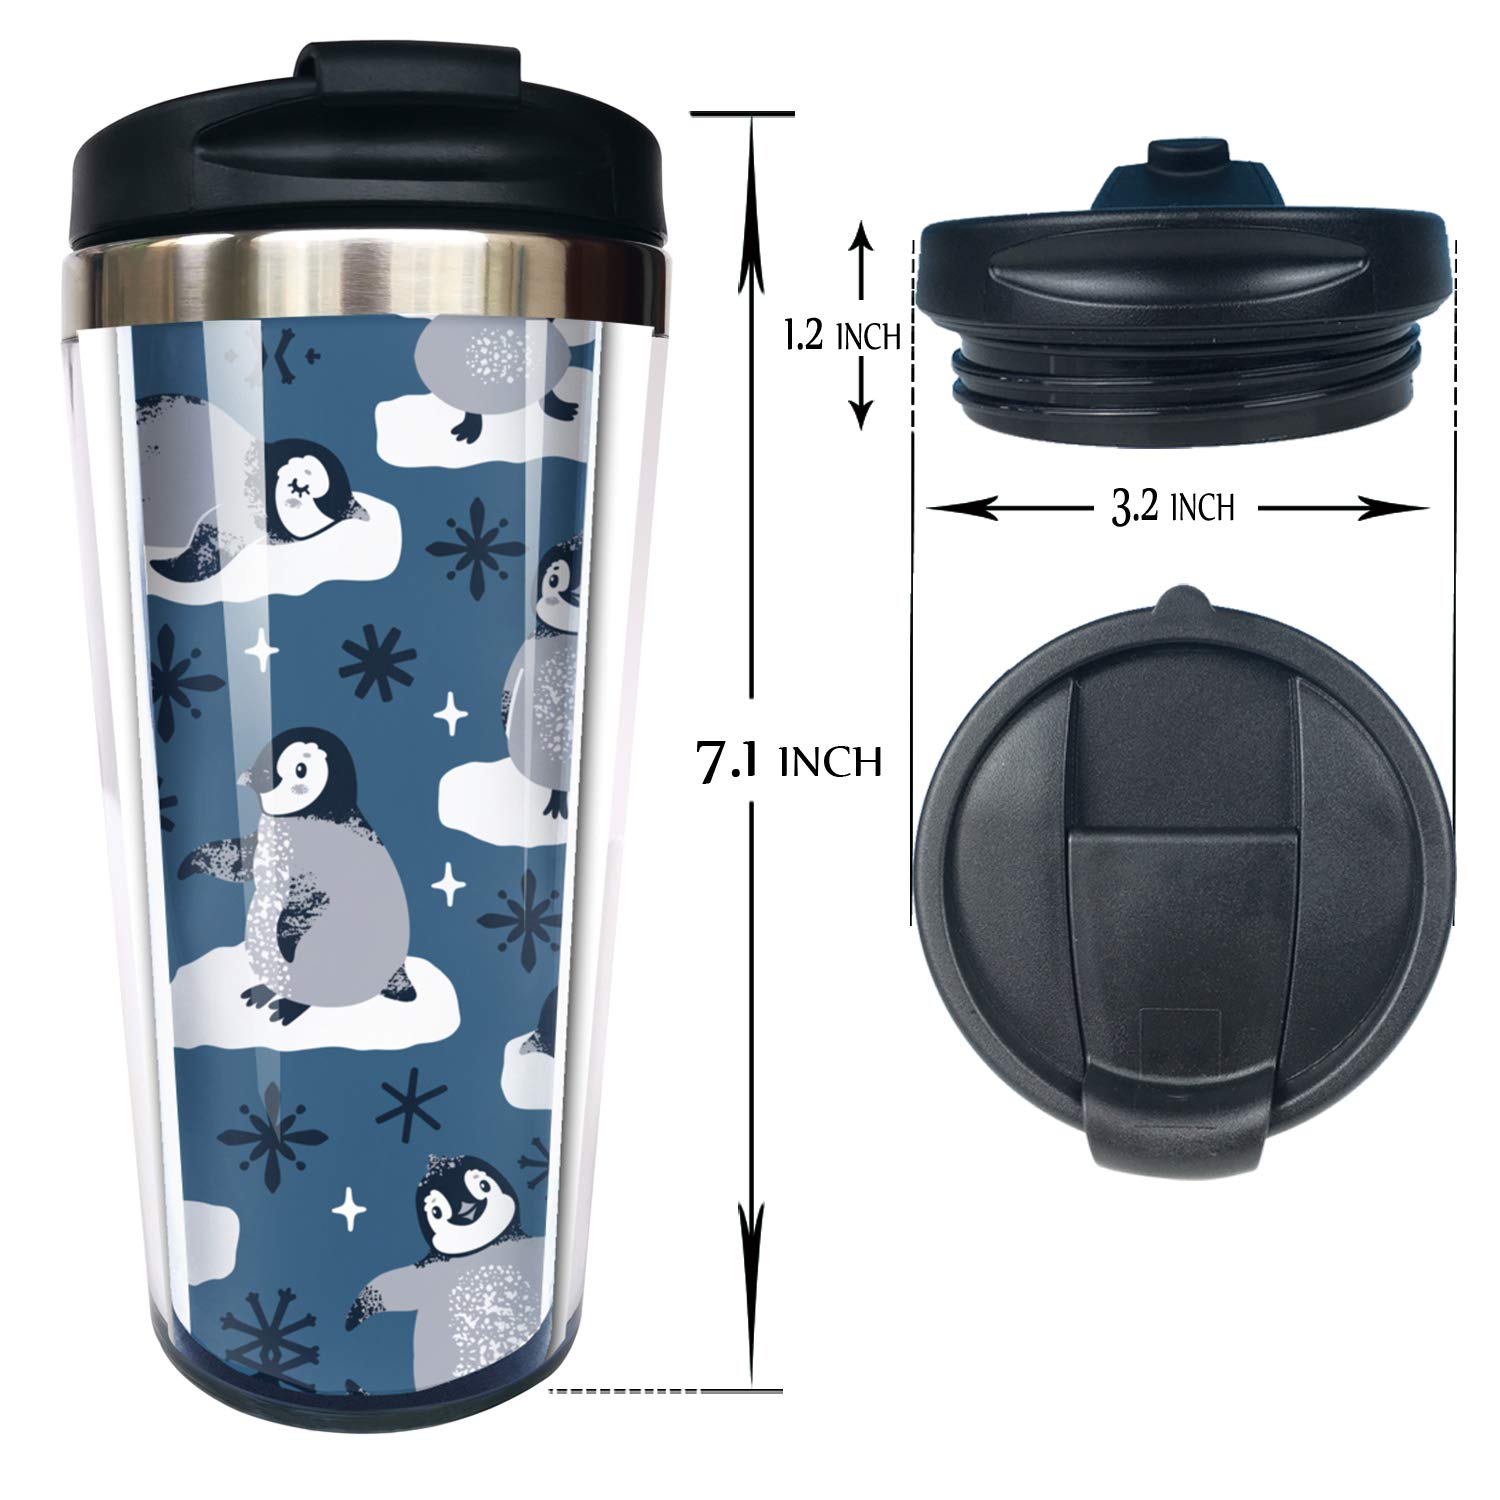 NVJUI JUFOPL Cute Penguins and Snowflakes Coffee Mug, Stainless Steel With Flip Lid 14 oz, Funny Coffee Cup for Travel Home Office